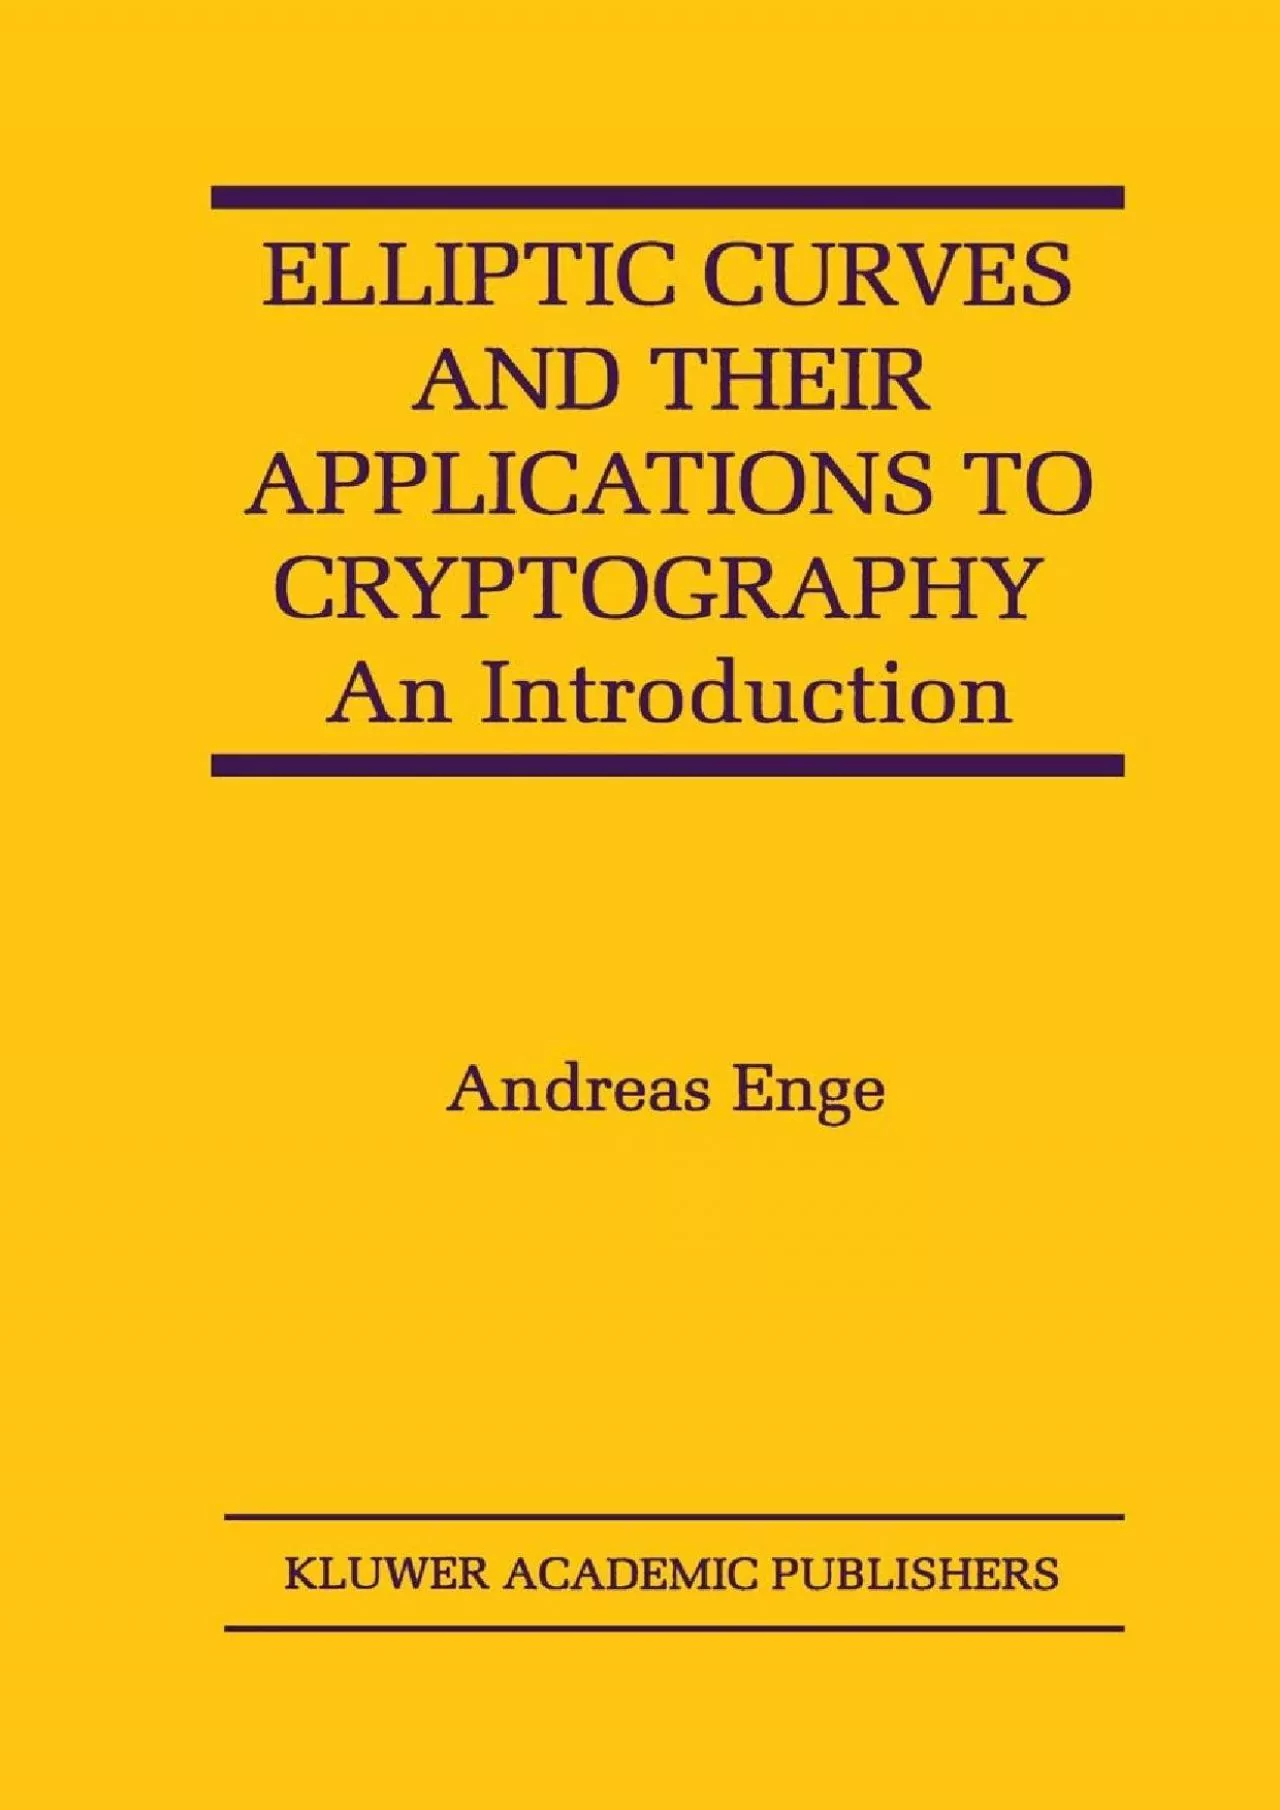 (EBOOK)-Elliptic Curves and Their Applications to Cryptography: An Introduction